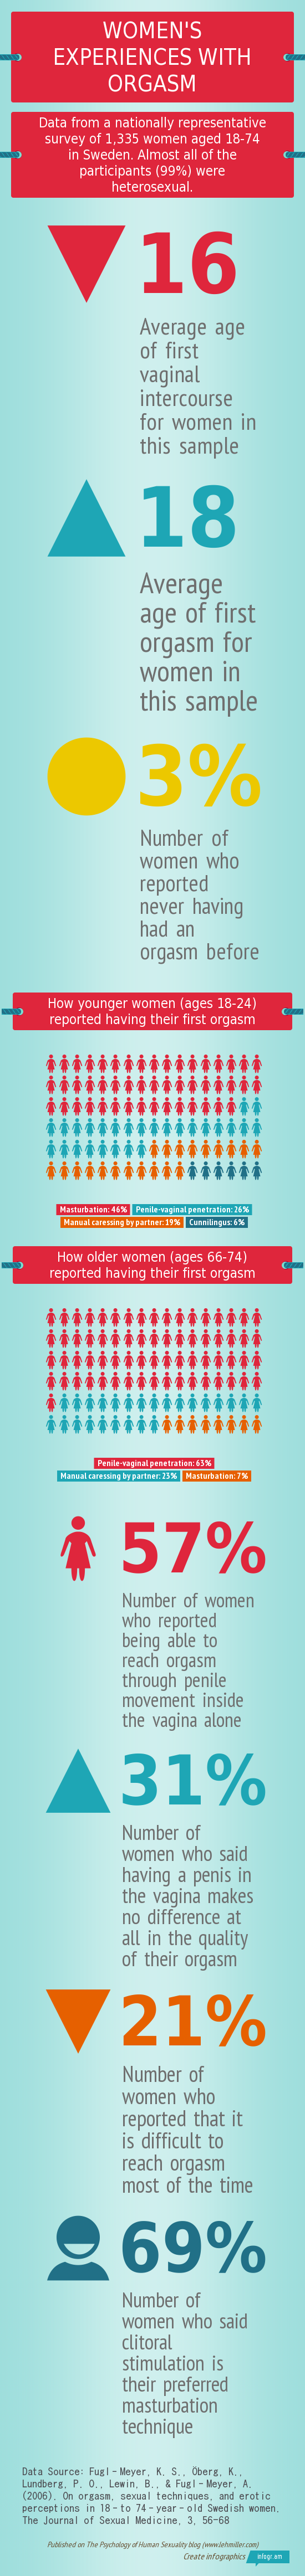 Infographic describing women's experiences with orgasm   